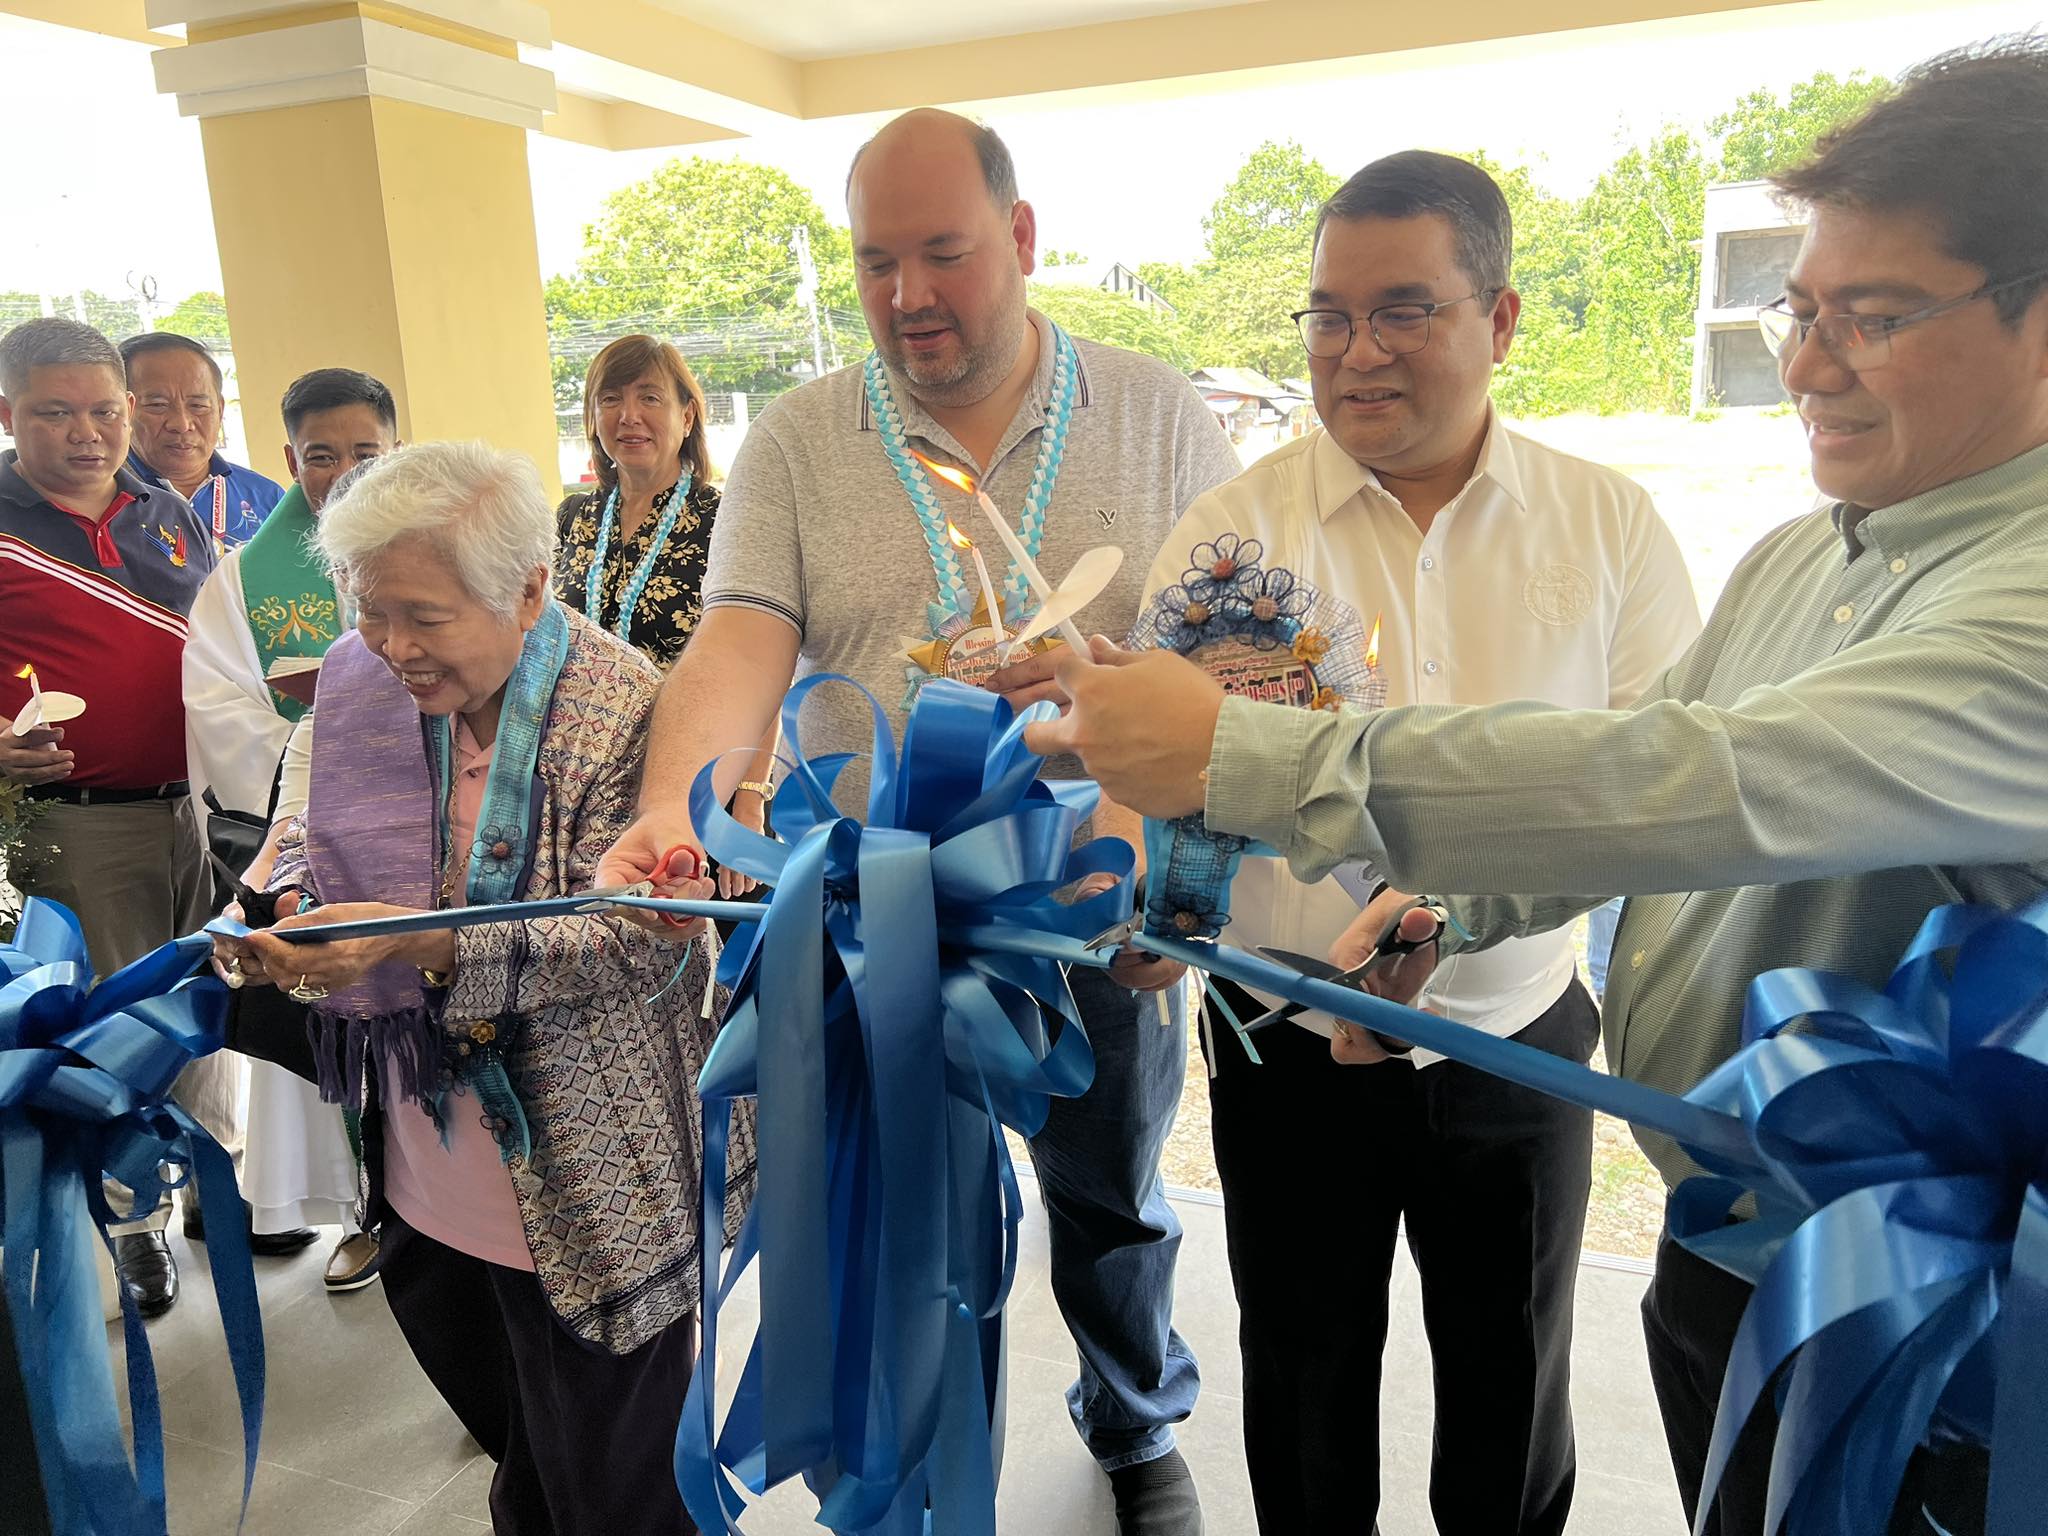 Ribbon cutting for the opening of the new sub-regional Educational Office in Dumaguete